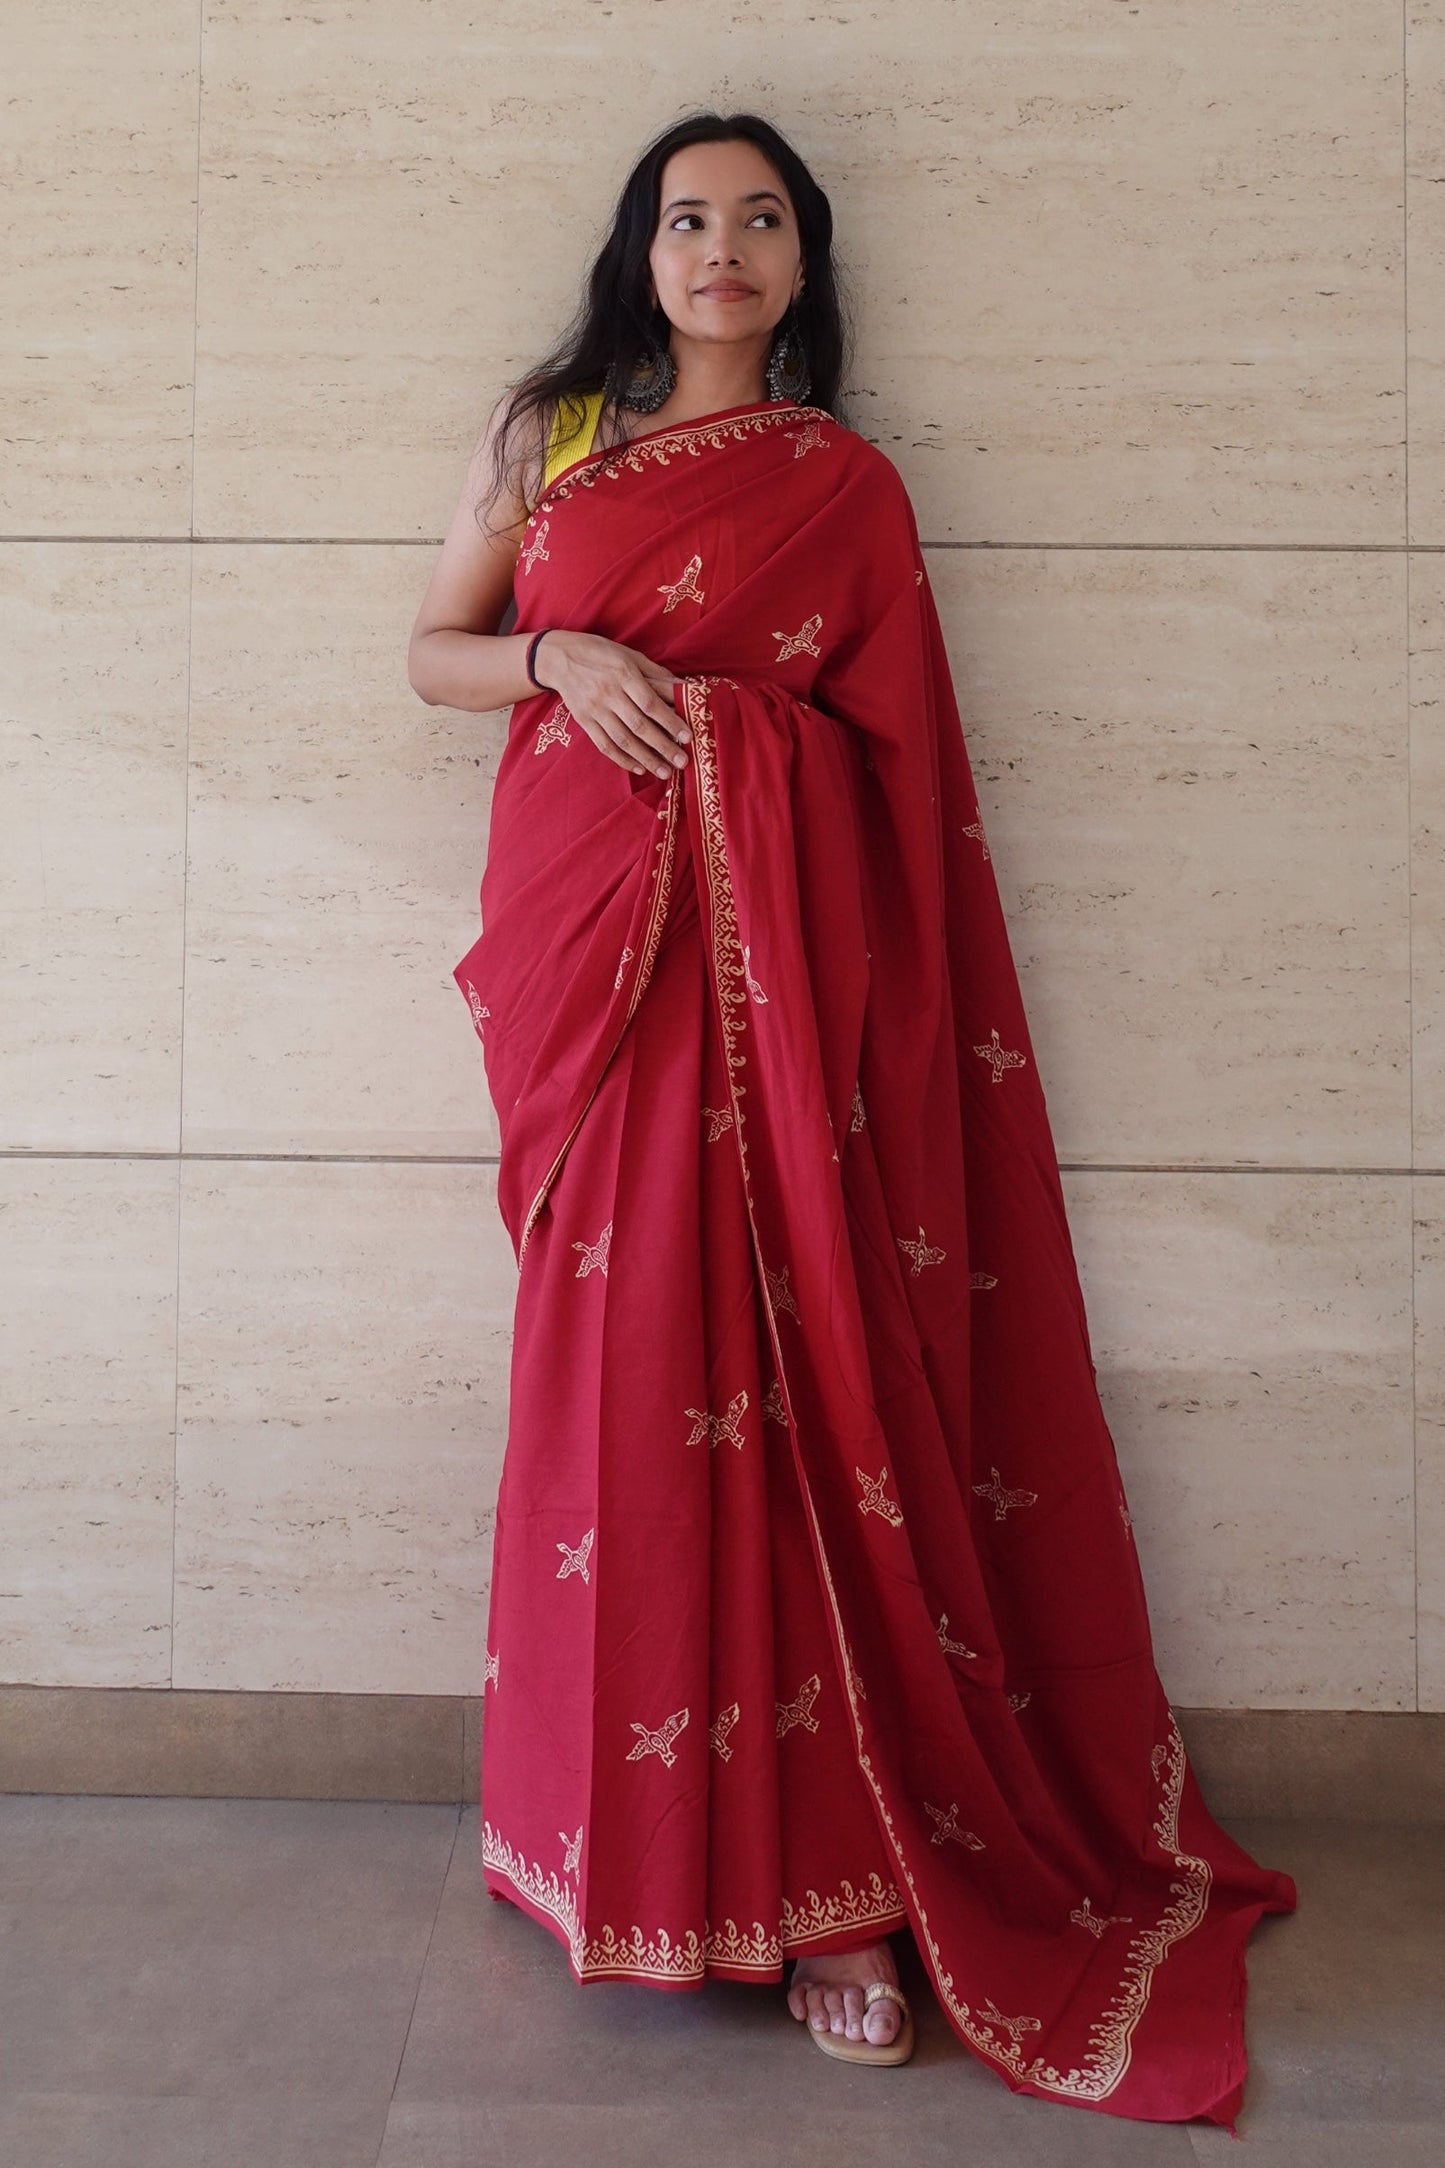 Free Sparrow - Red Handblock Print Natural Dyed - Red Mulmul Cotton Saree